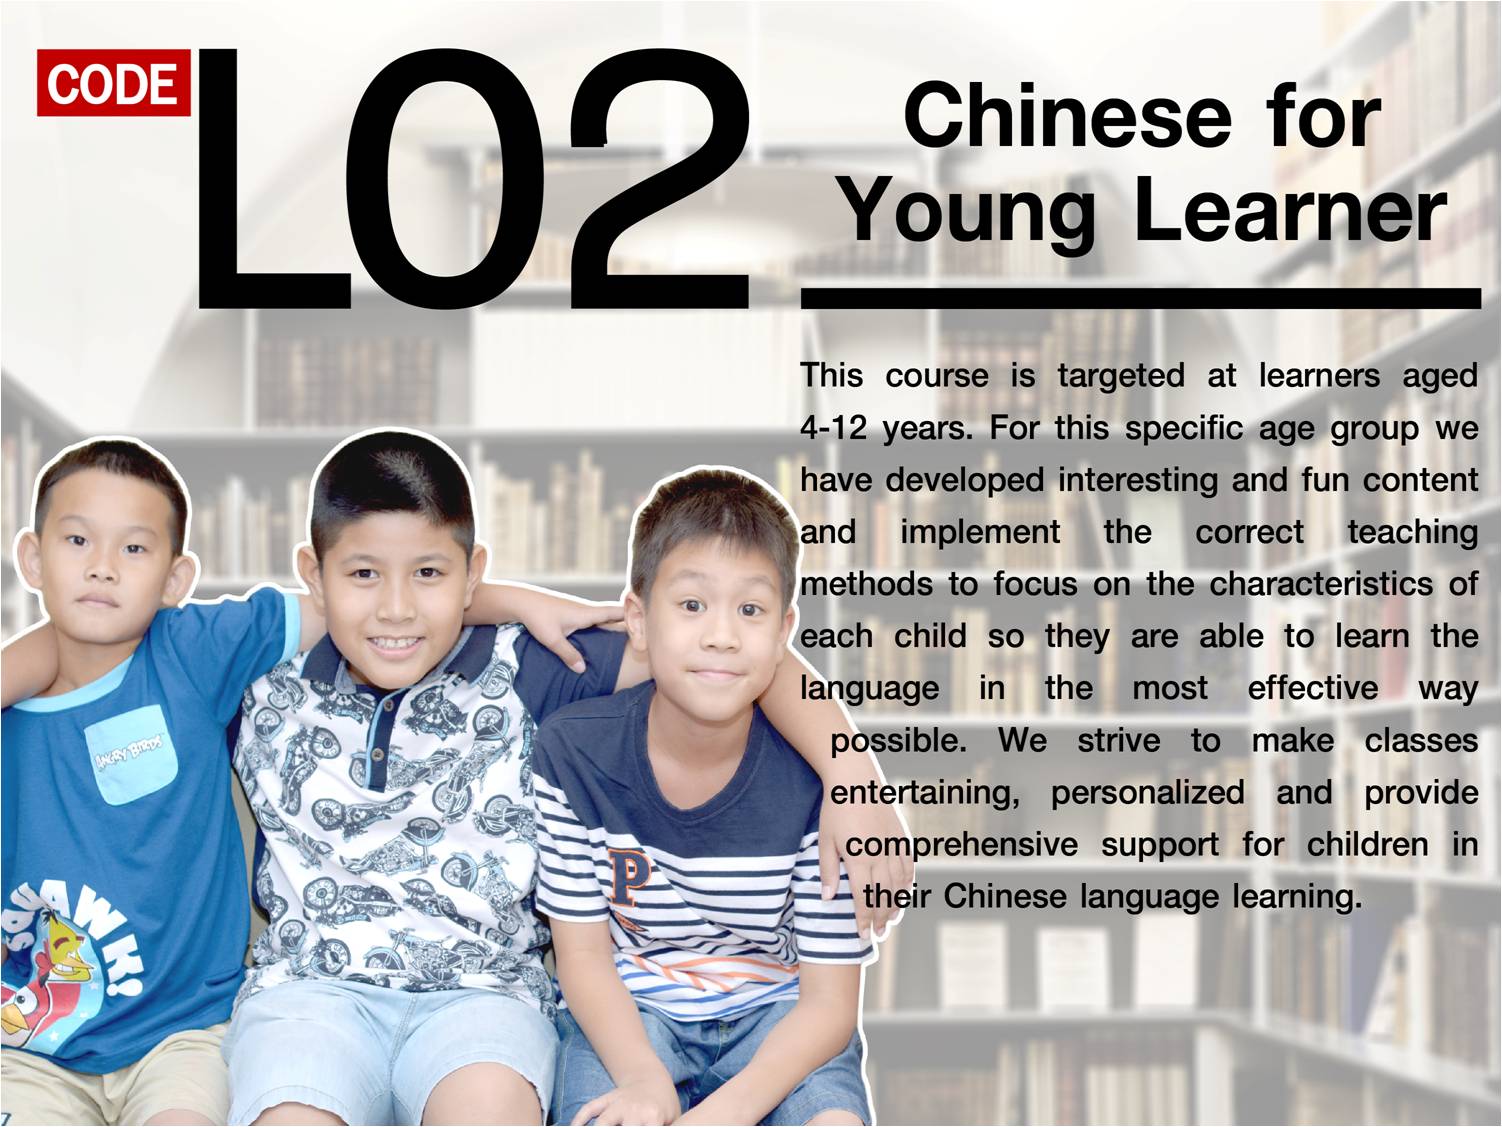 Chinese for Young Learner